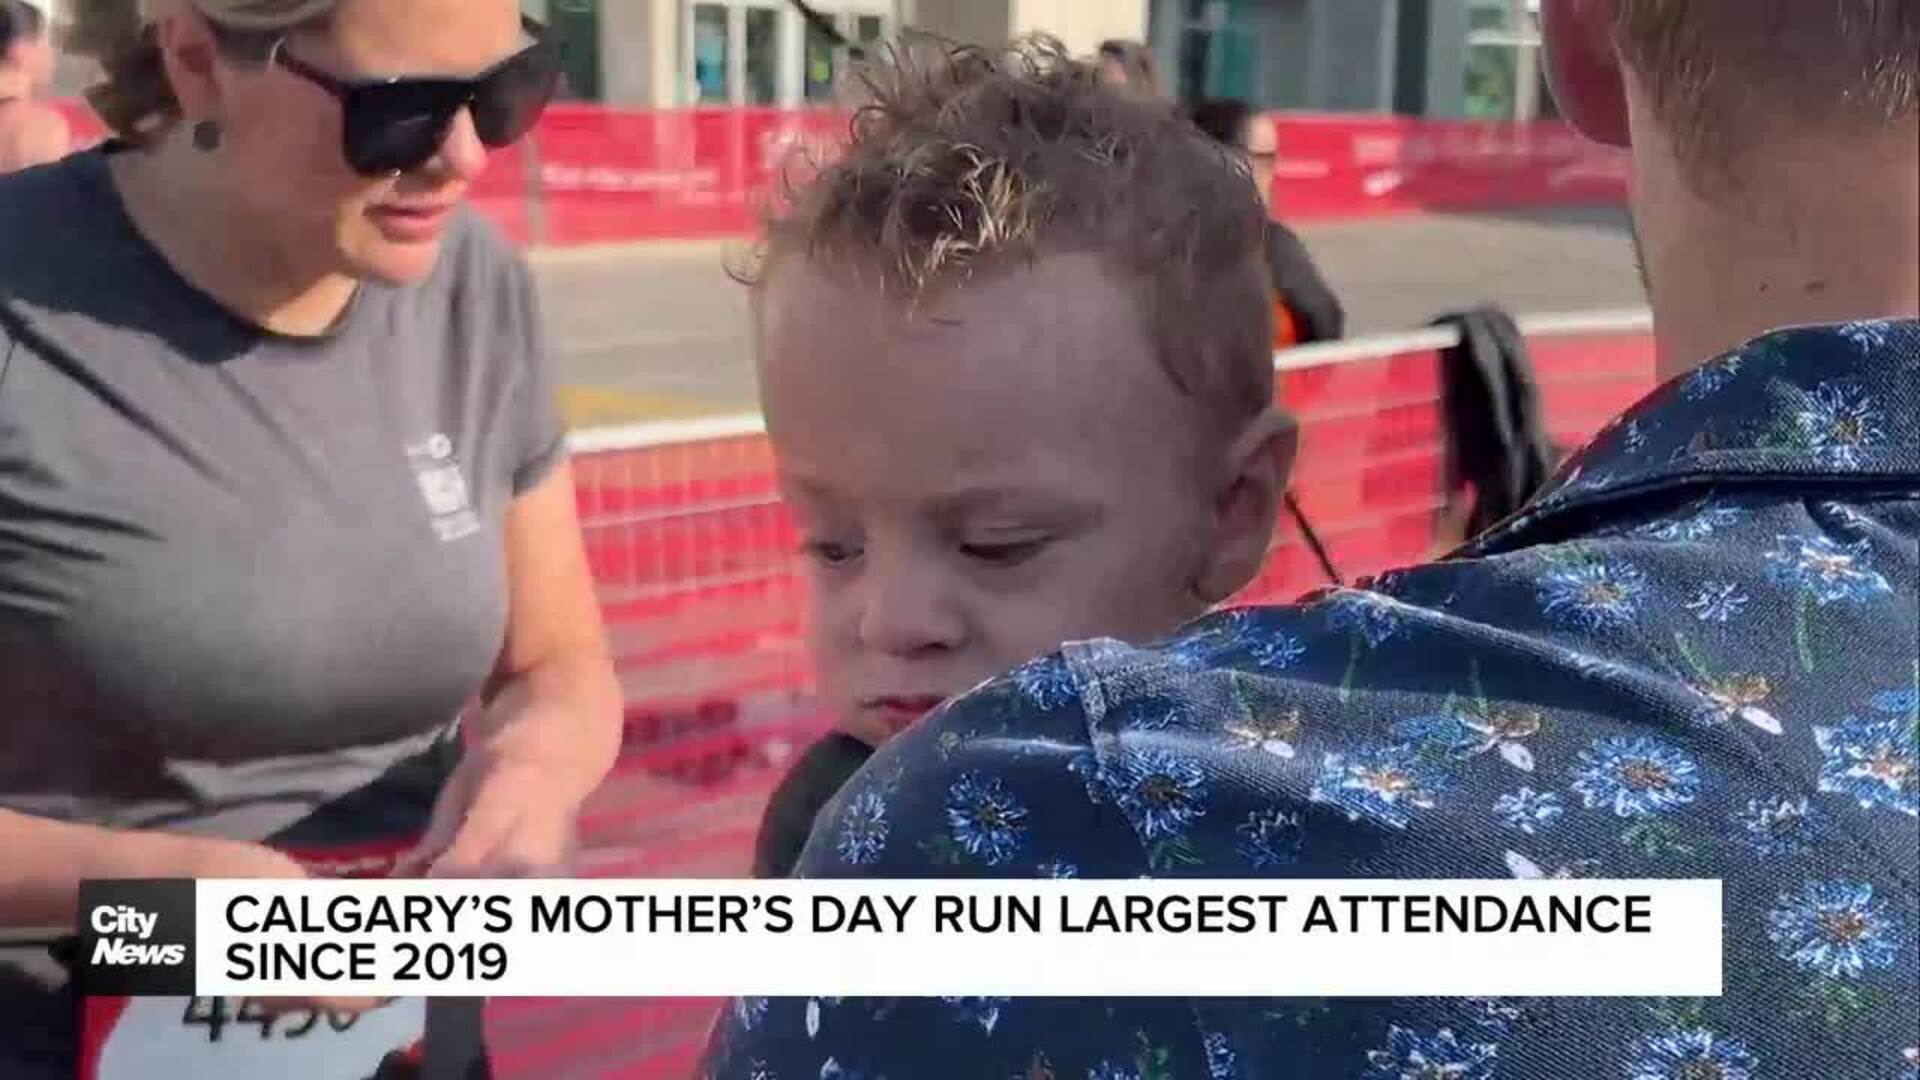 The Mother’s Day Run welcomes largest attendance since 2019